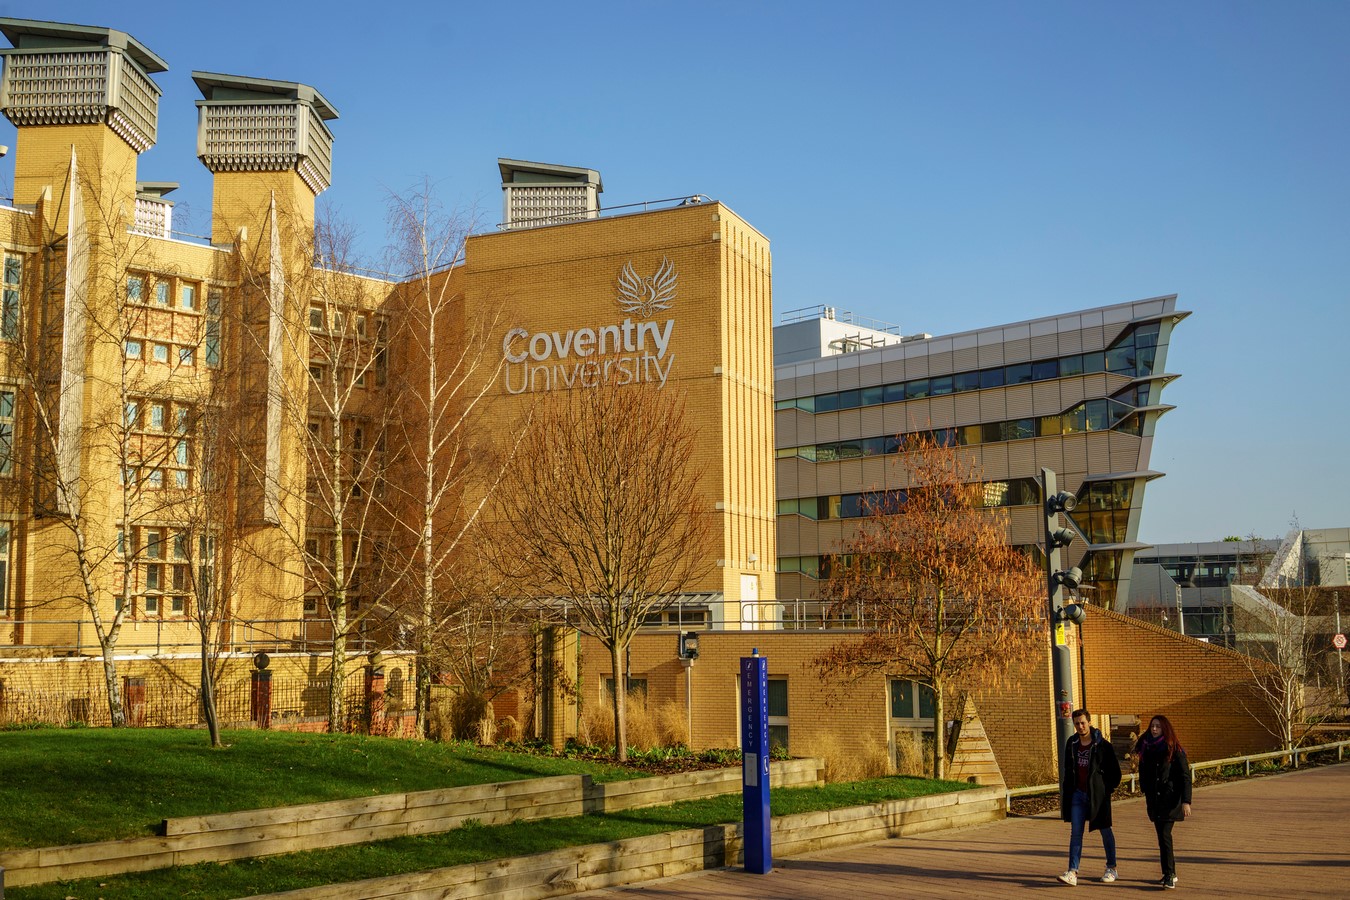 Coventry University _©www.idp-connect.com